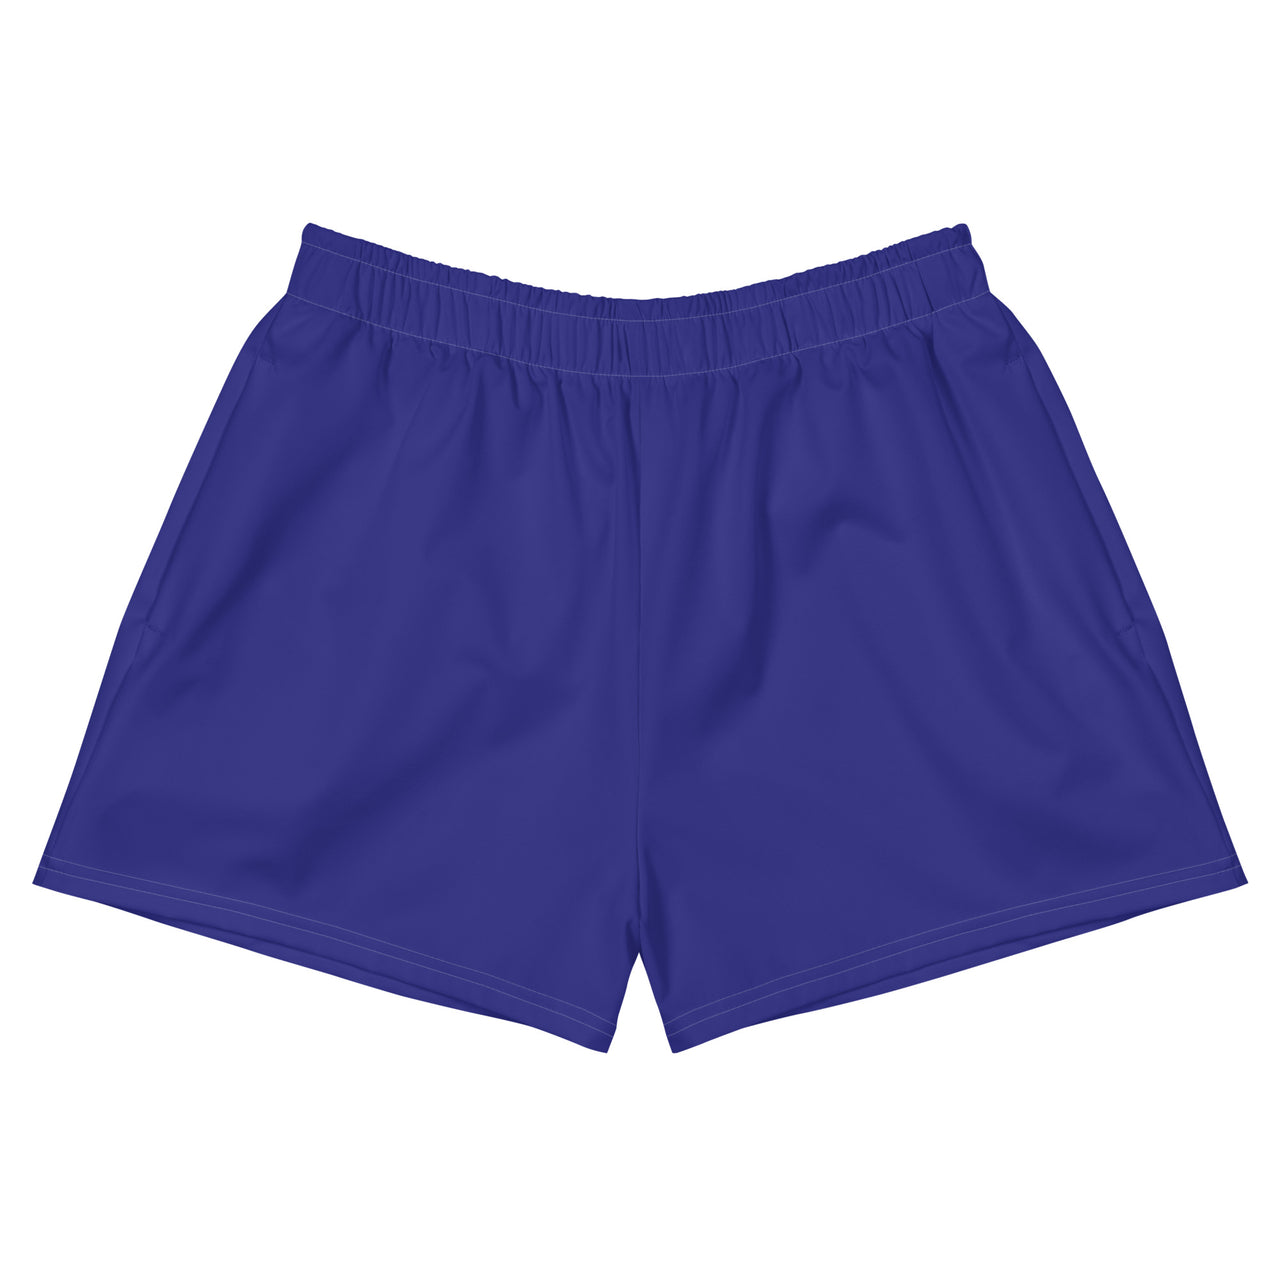 Women’s Recycled Solid Athletic Shorts - Dark Slate Blue SHAVA CO